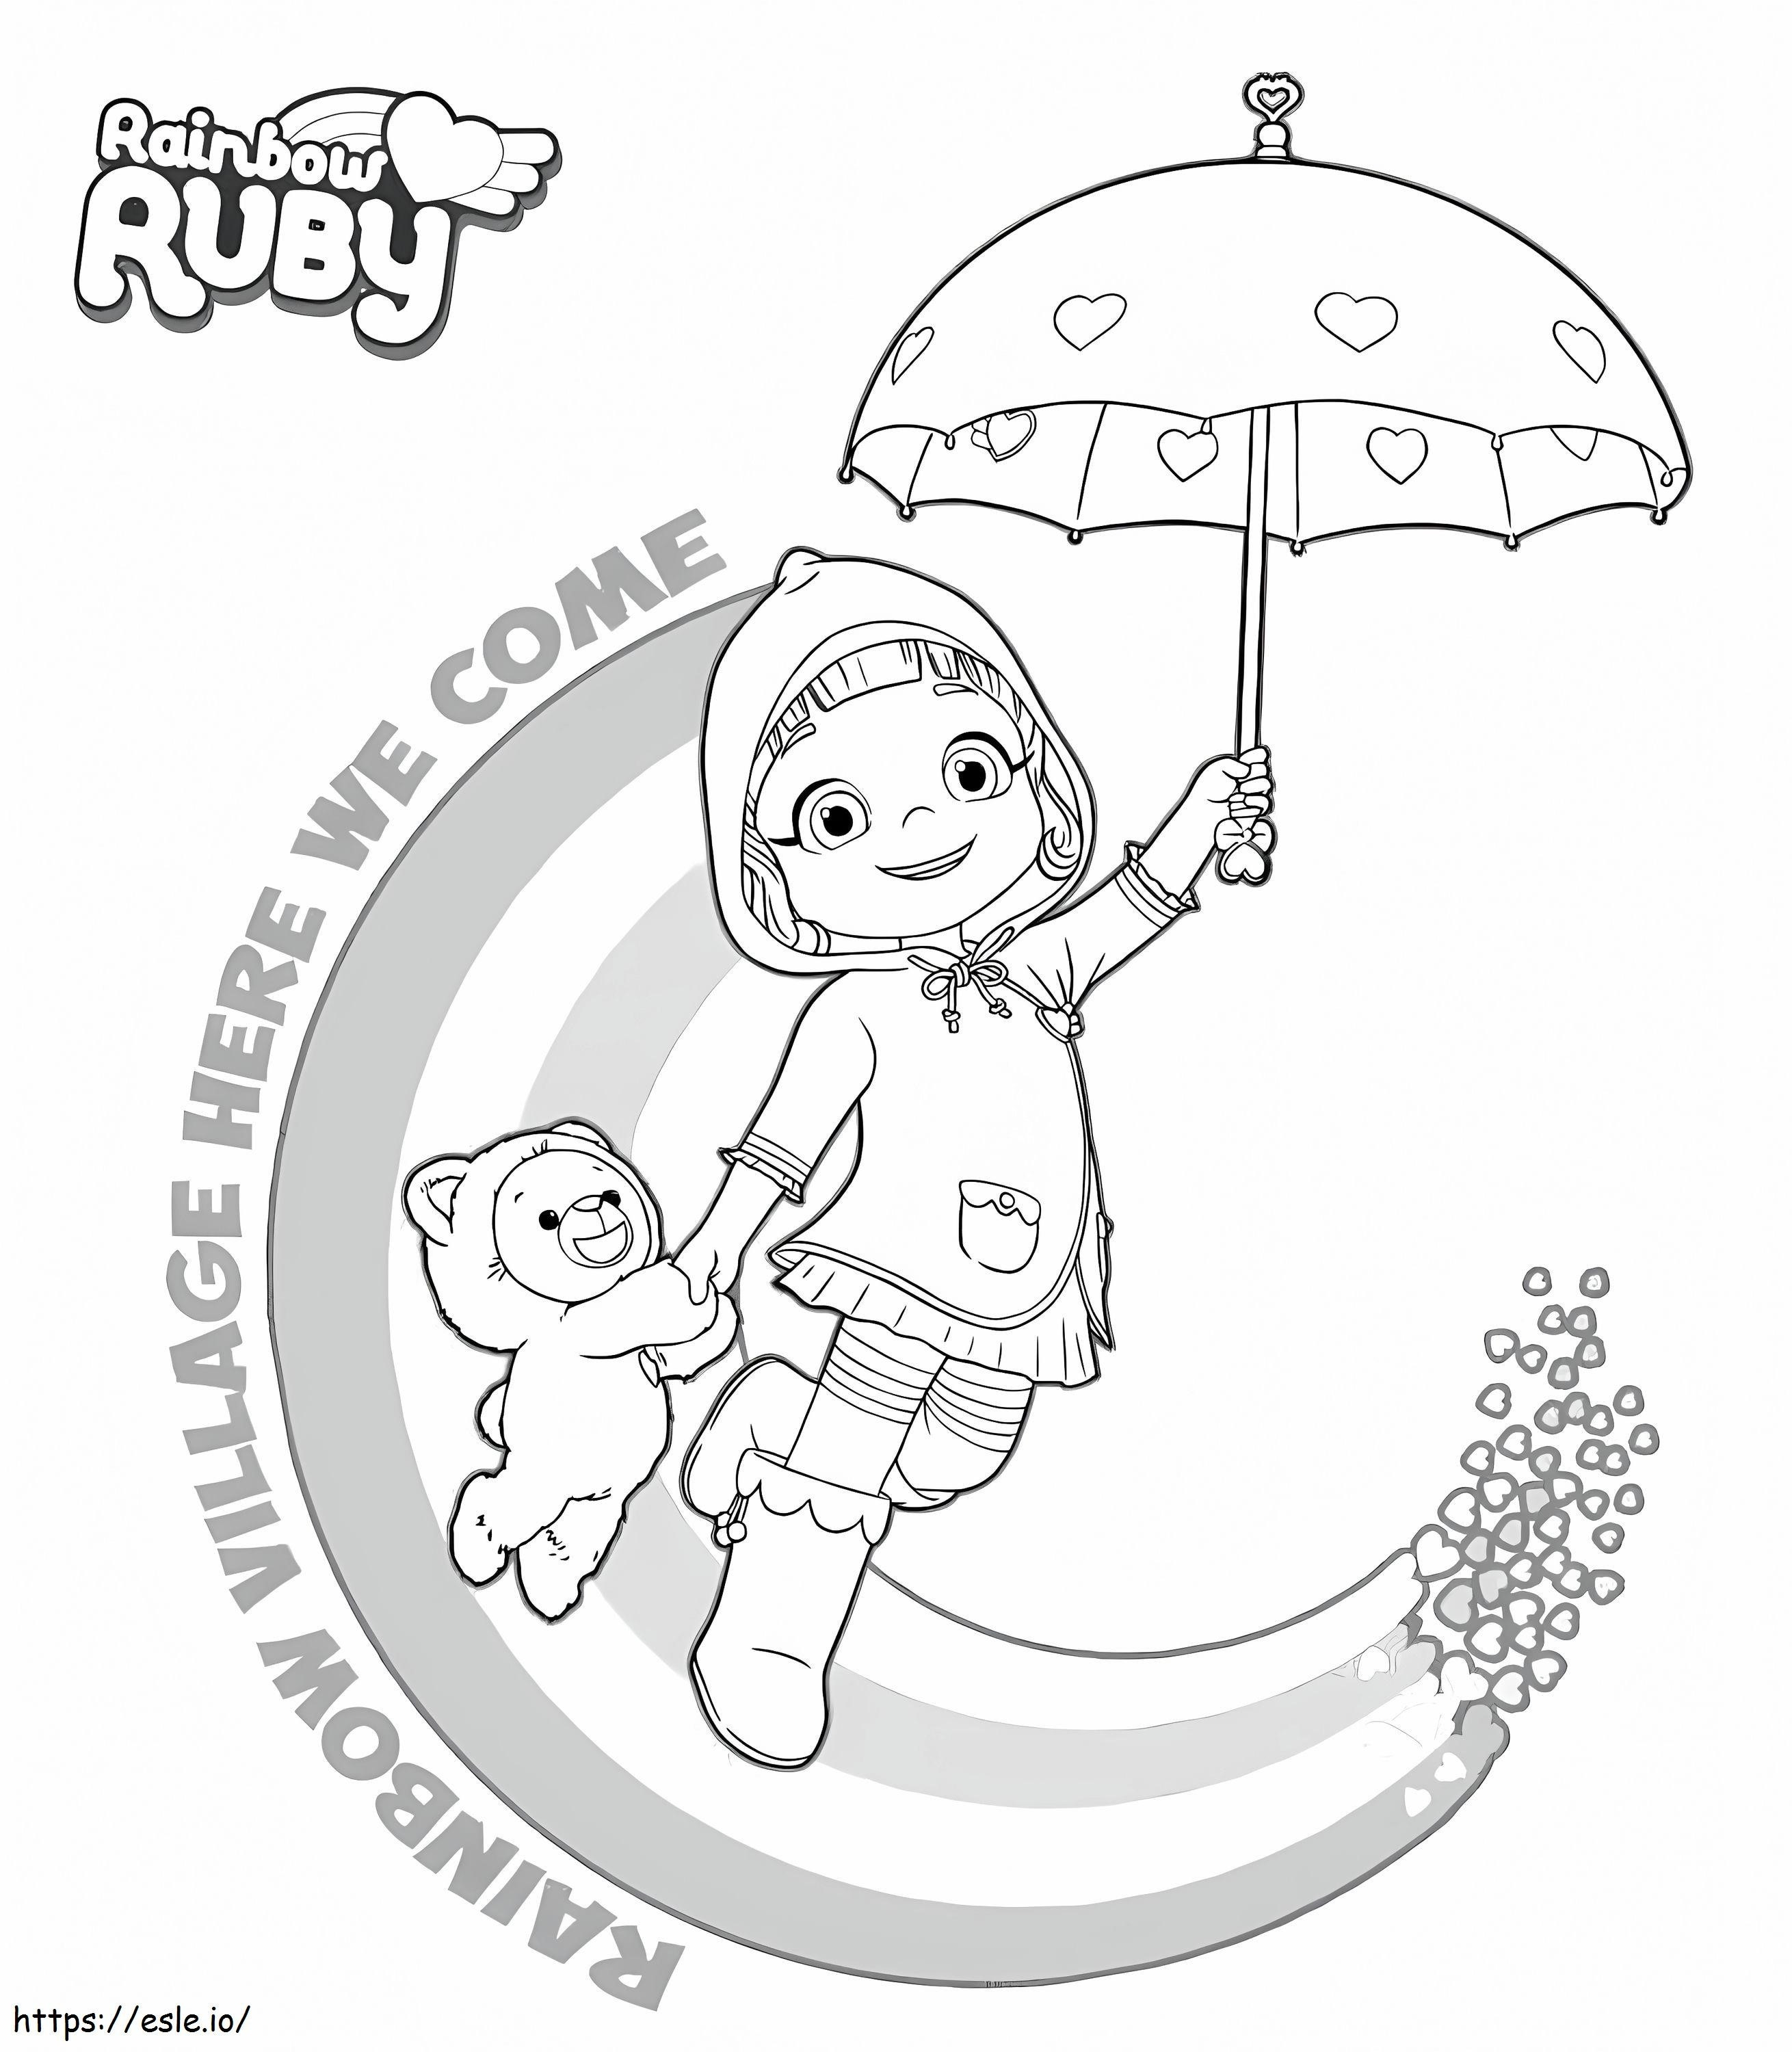 Printable Rainbow Ruby coloring page